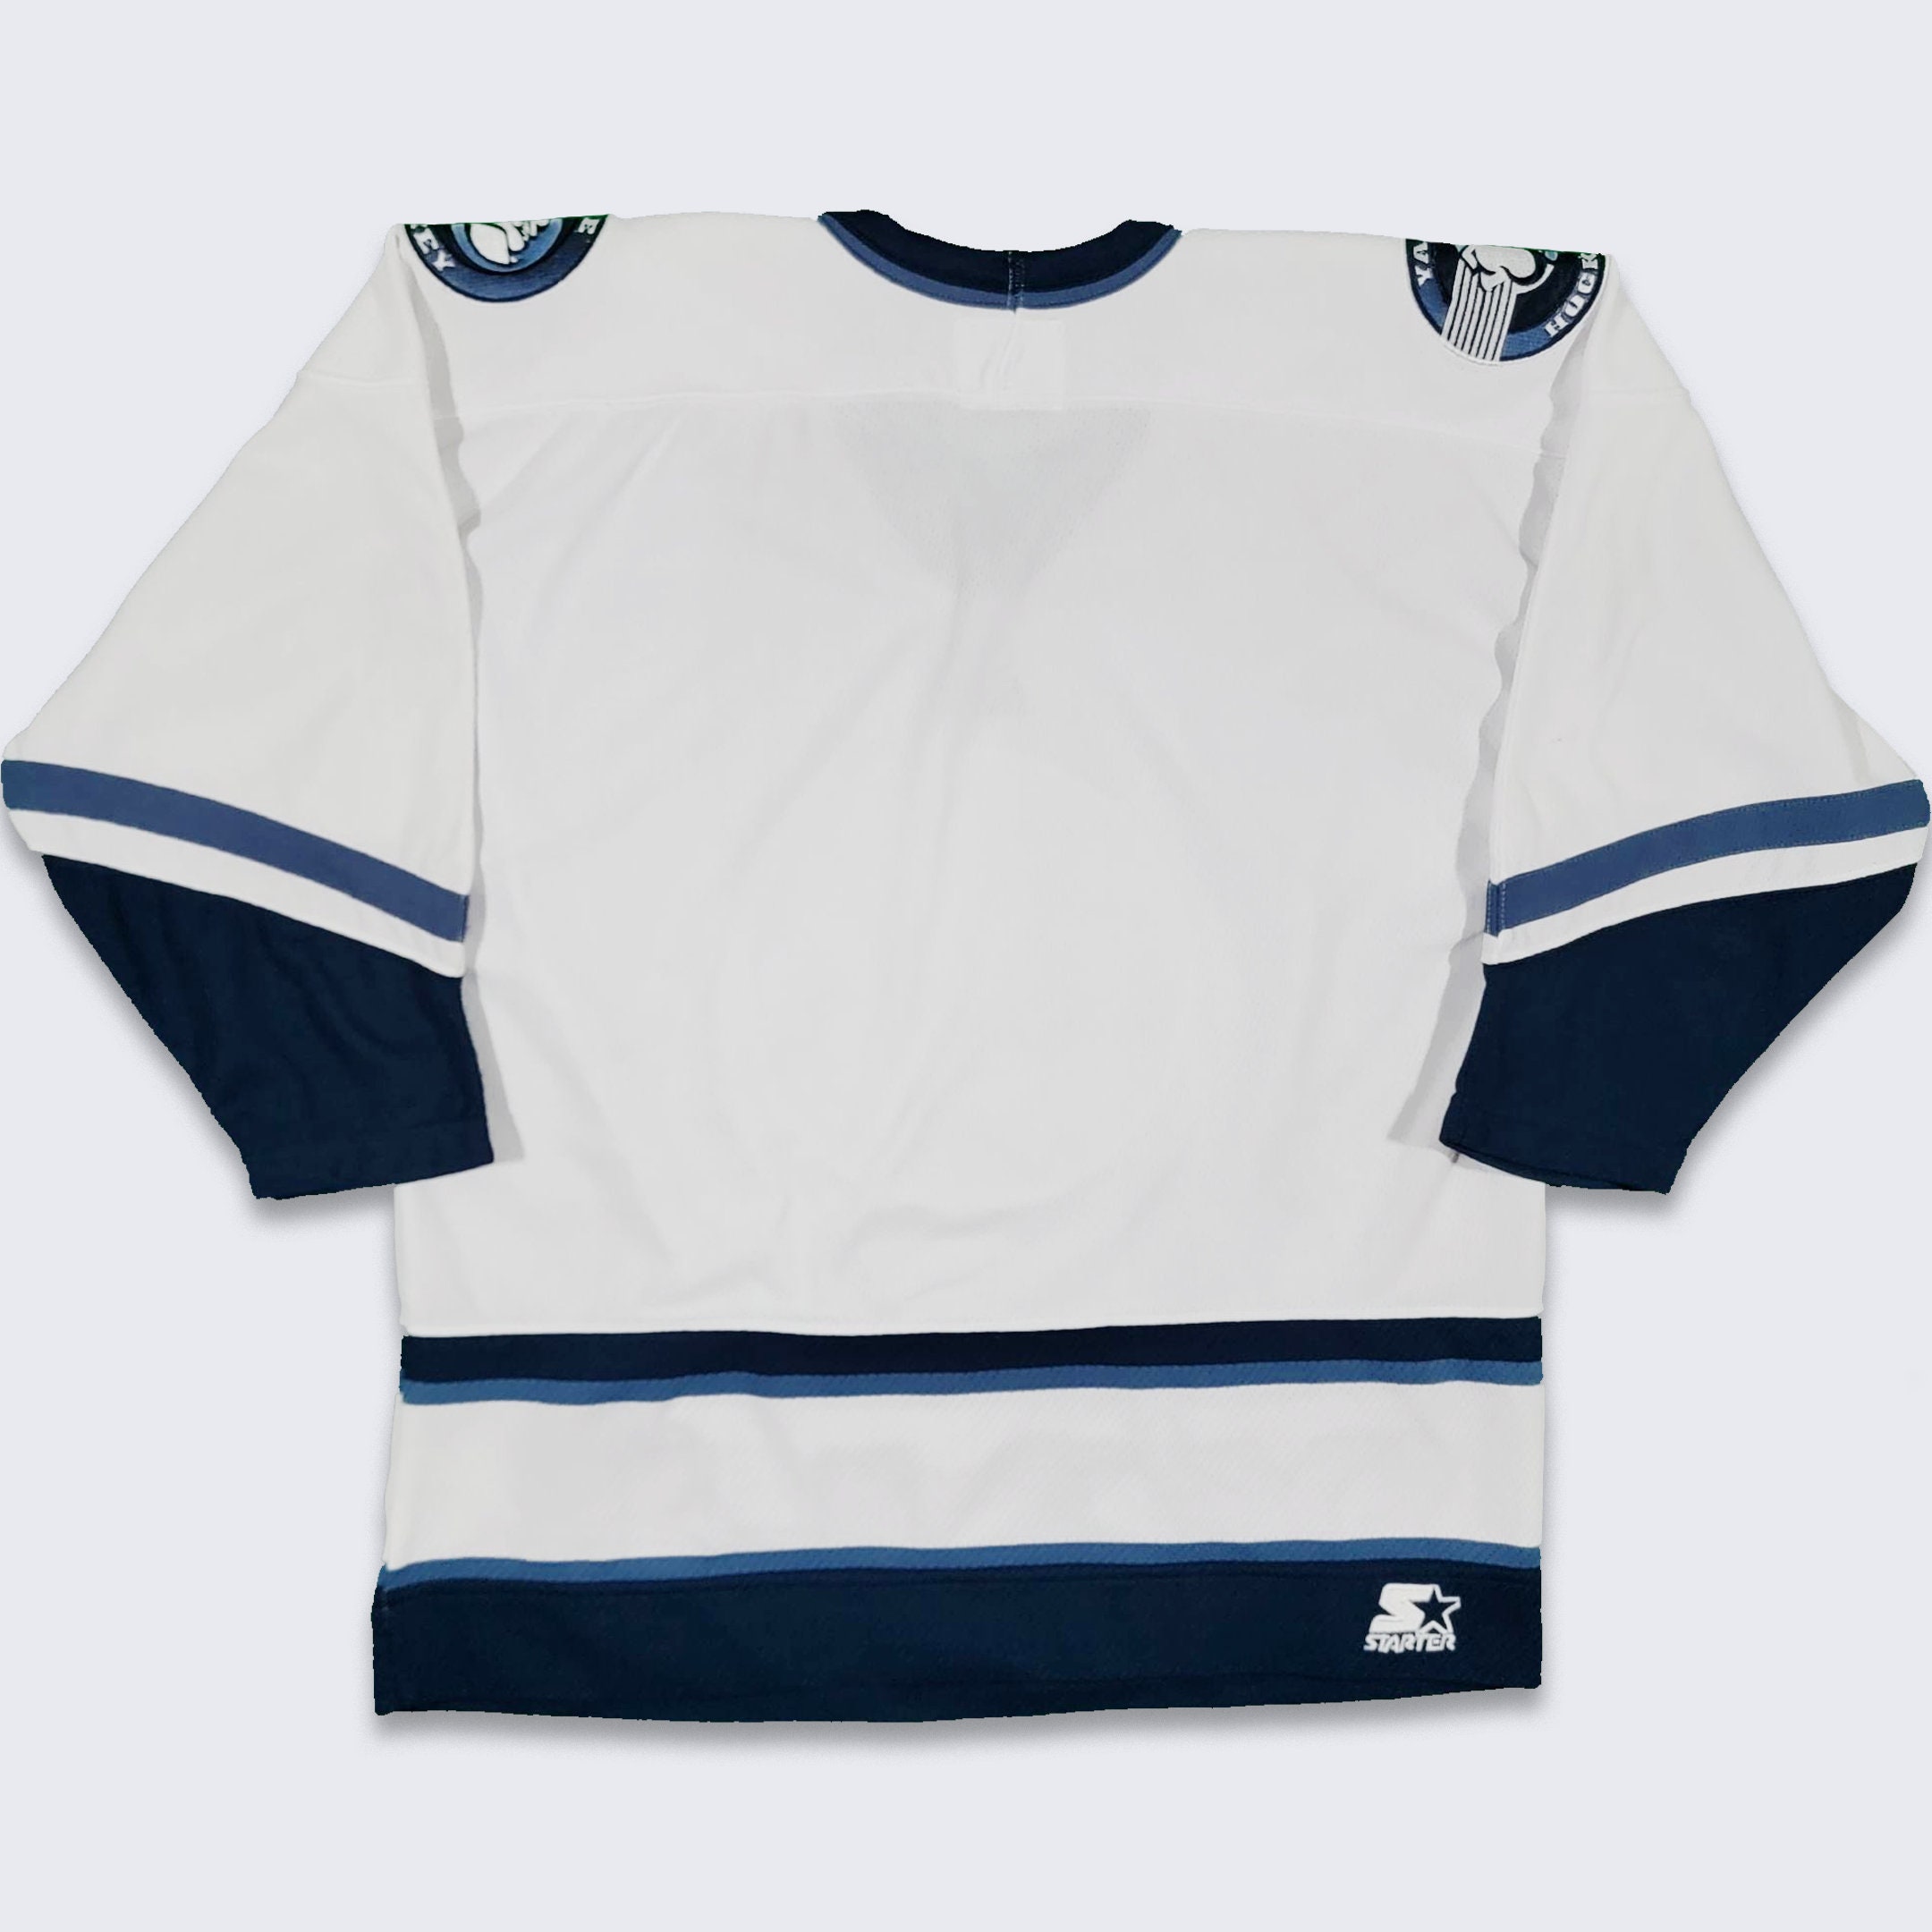  HSX Tees Customize Green/Navy/Light Blue Hockey Jersey for Men  Women Kids/Youth Design Your Own Stitched Letters and Numbers : Clothing,  Shoes & Jewelry